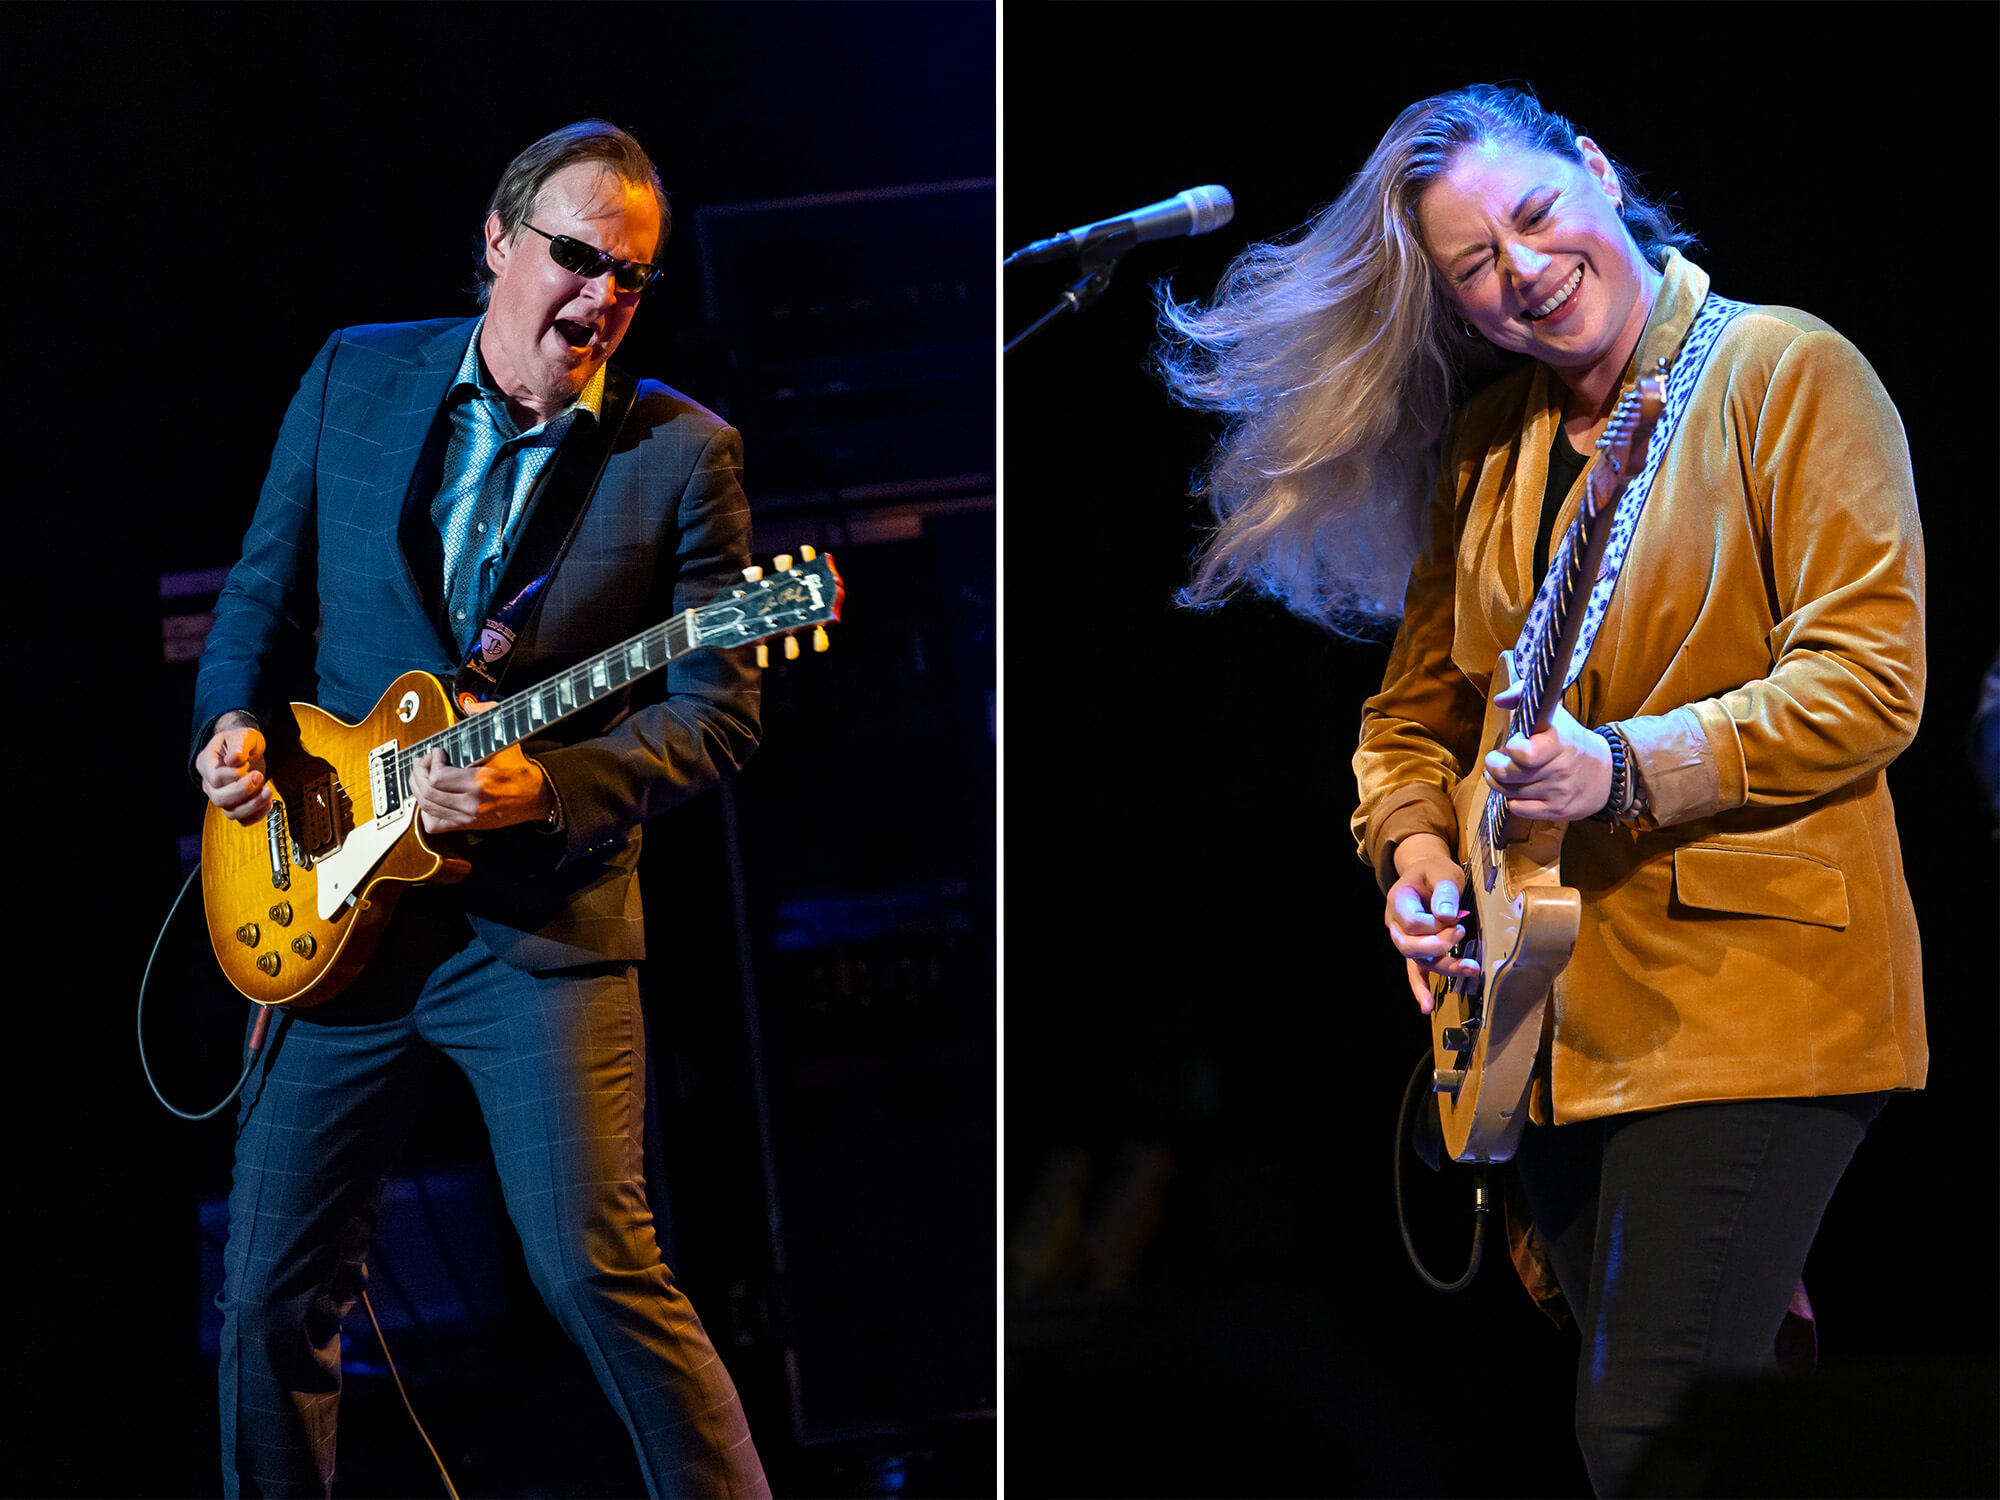 (Left) Joe Bonamassa playing a Les Paul. He wears a suit and sunglasses. (Right) Joanne Shaw Taylor playing her Telecaster. She is flipping her long, blonde hair and wears a golden-coloured blazer jacket.